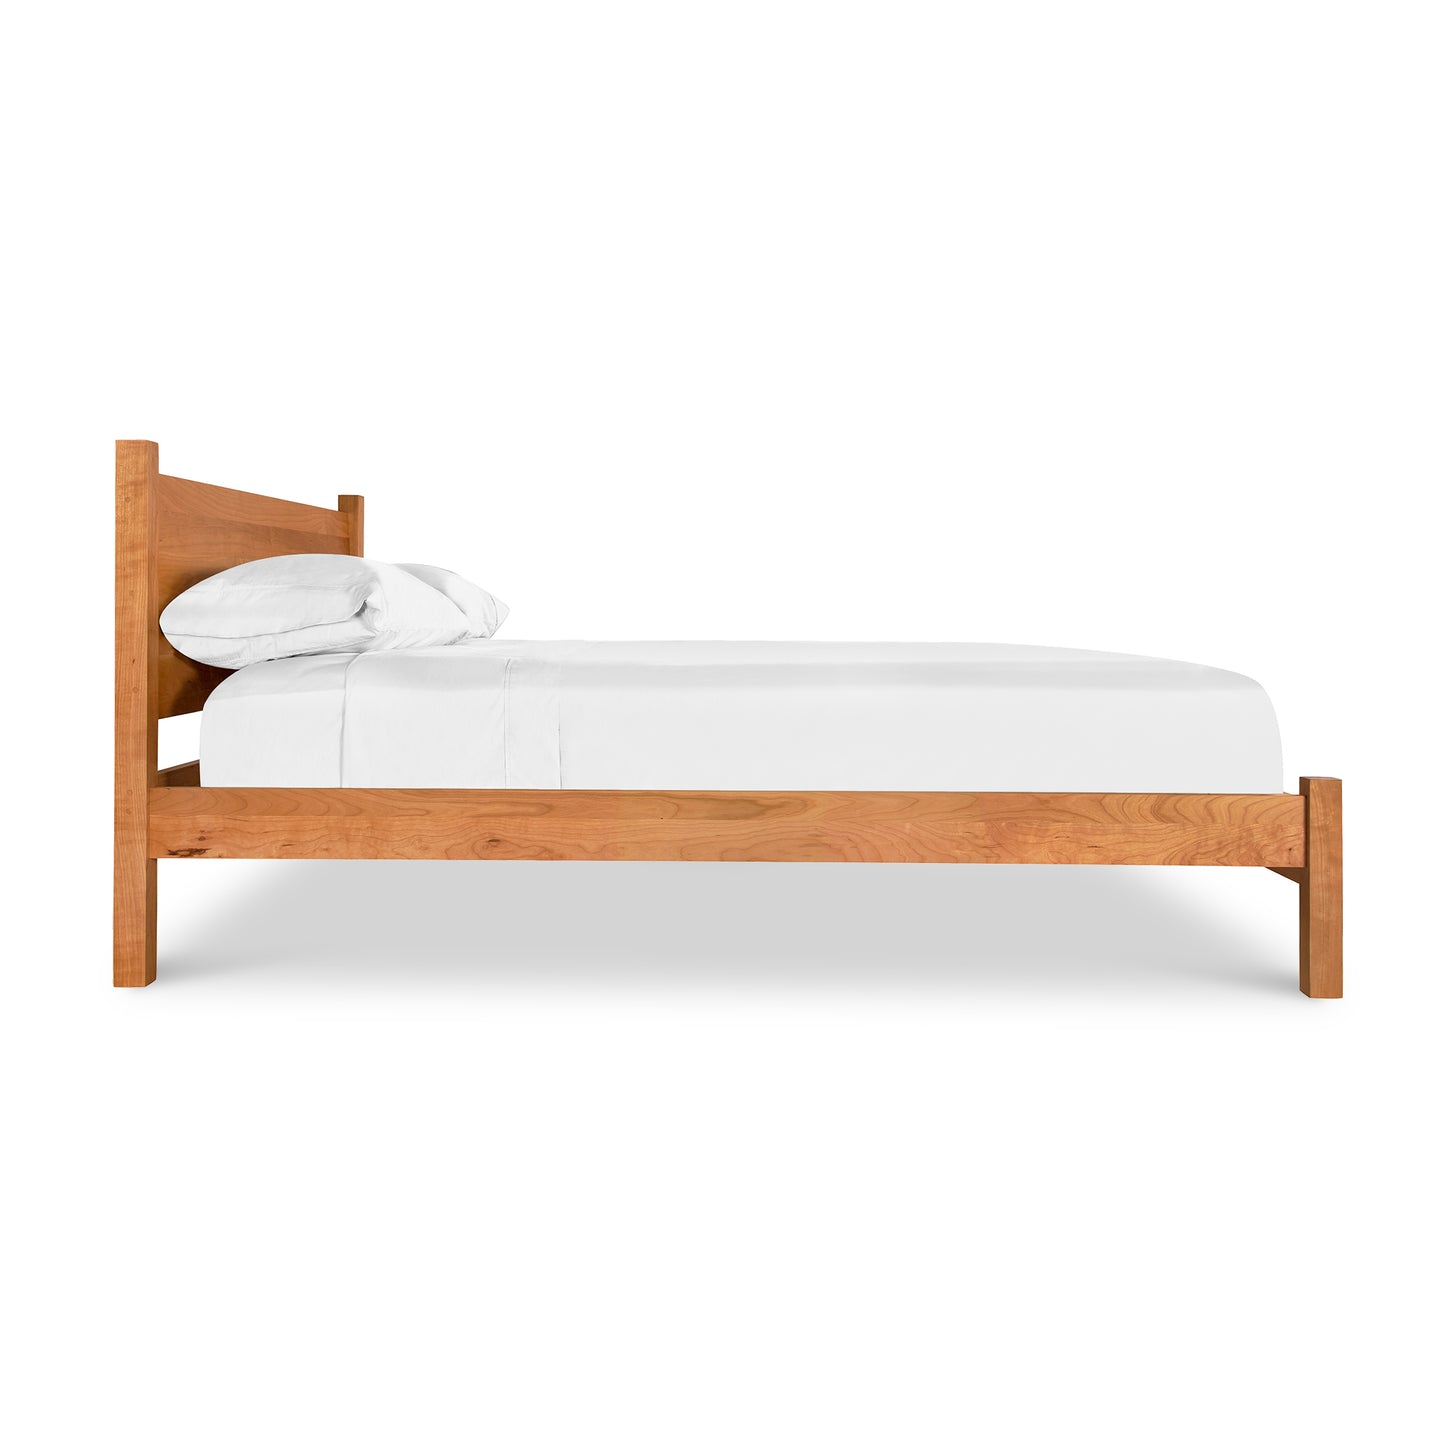 A Classic Wood Bed by Lyndon Furniture with white sheets on it.